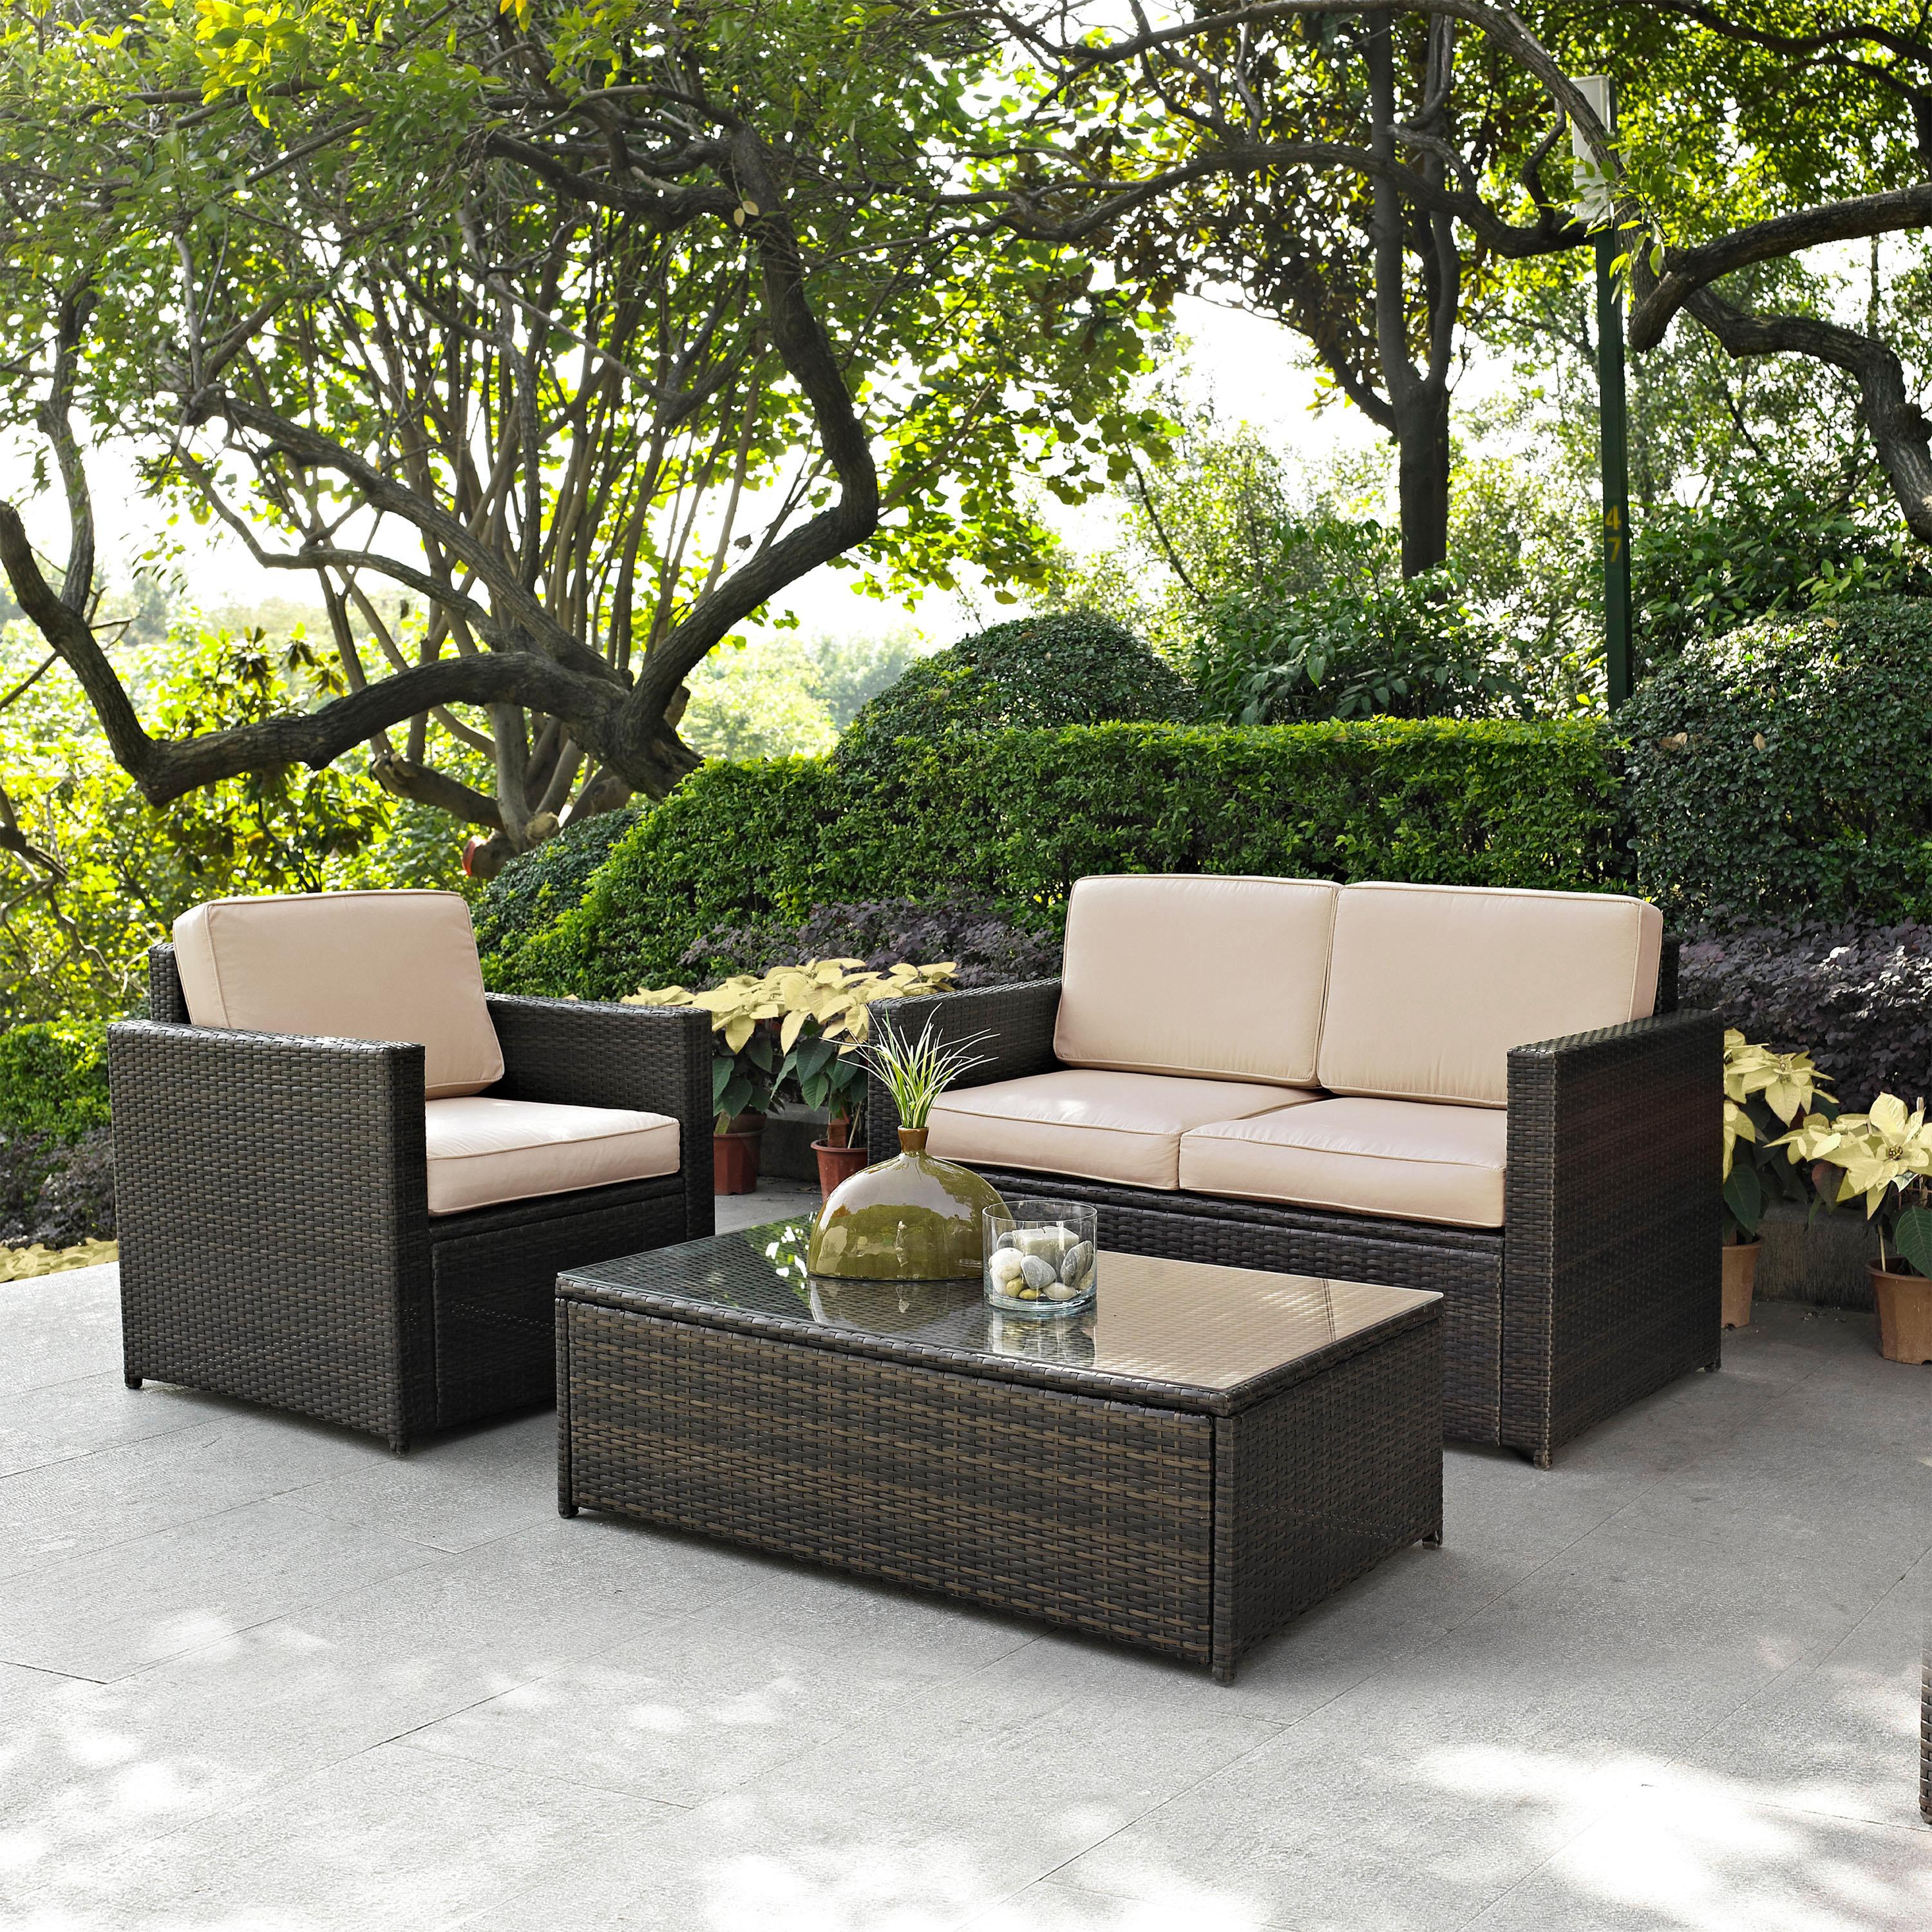 Crosley Palm Harbor 3 Piece Wicker Patio Sofa Set in Brown and Sand - image 3 of 4